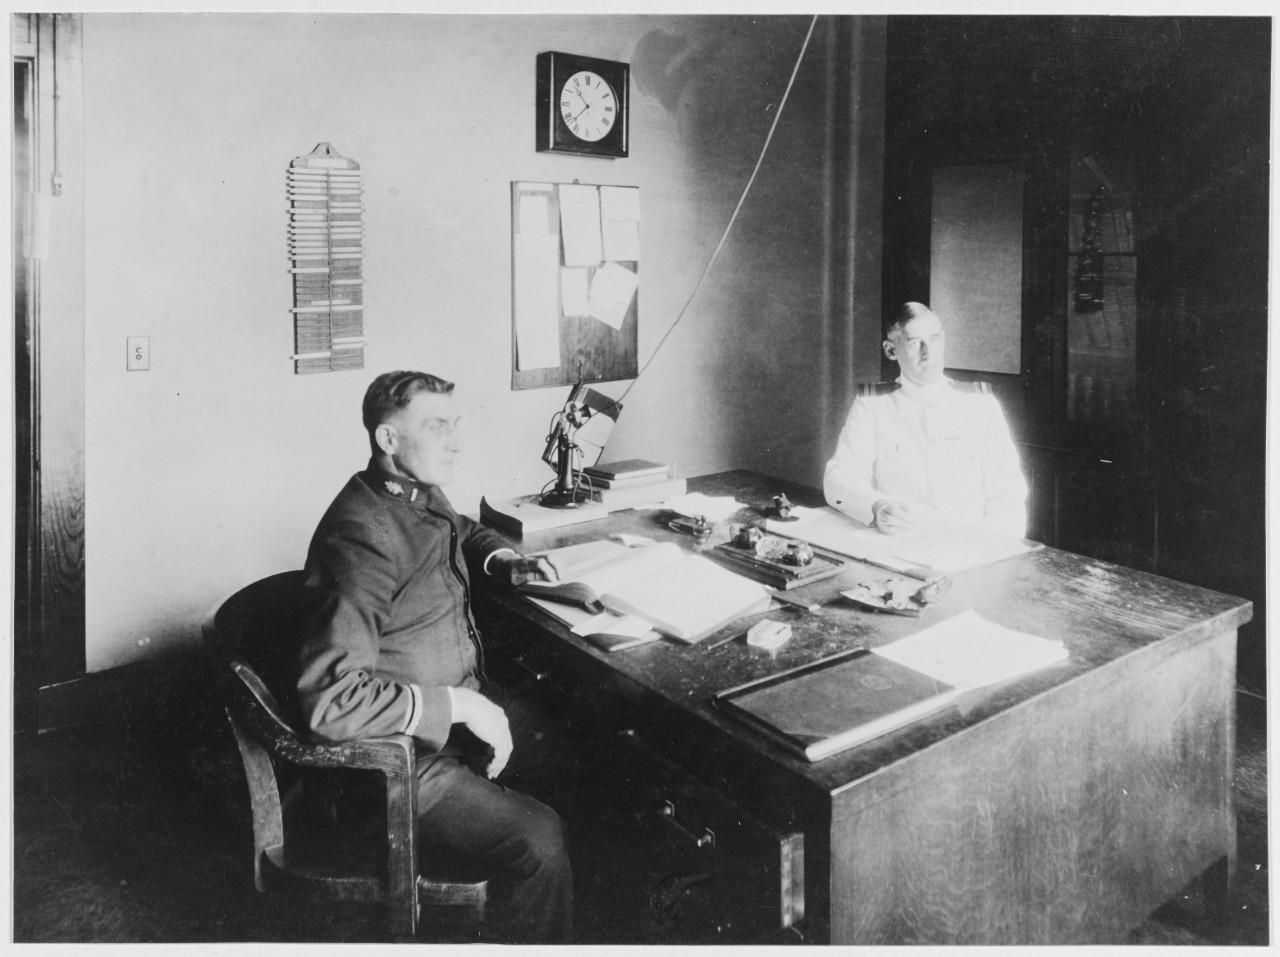 Officers of the day seated at desk. U.S. Naval Hospital, Chelsea, Massachusetts. June 2, 1919.